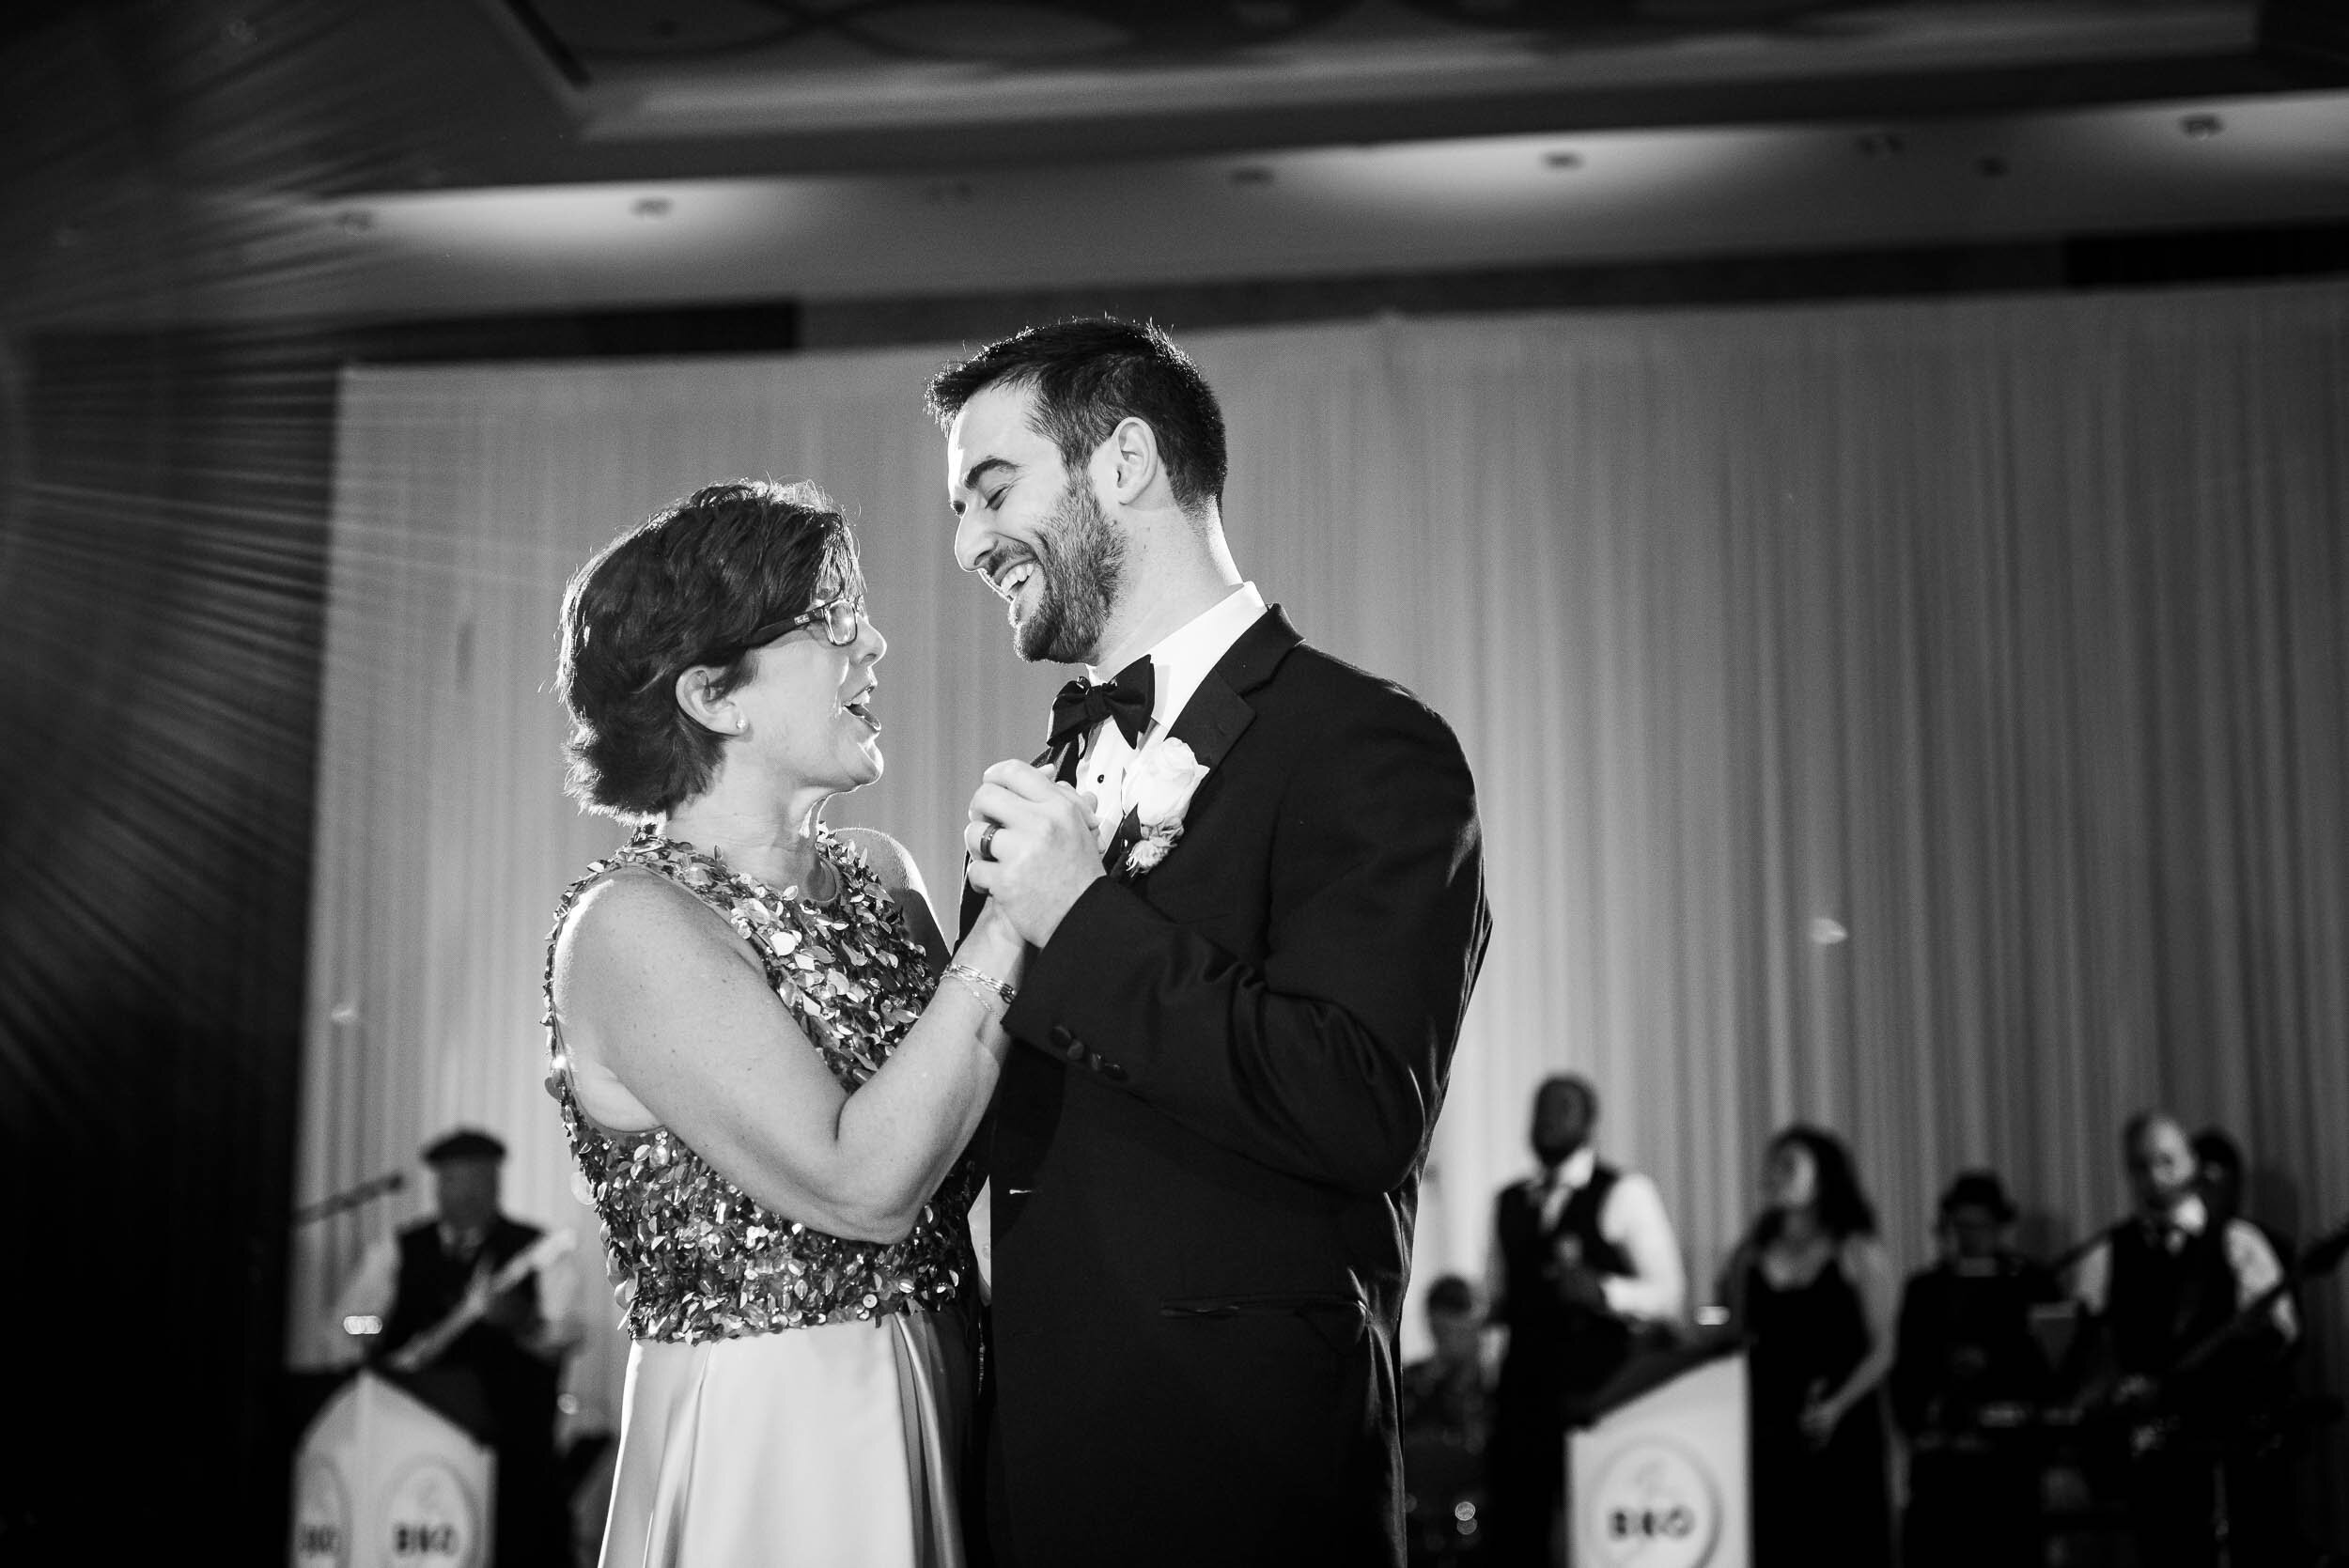 Mother son wedding dance: Loews Chicago Hotel Wedding captured by J. Brown Photography